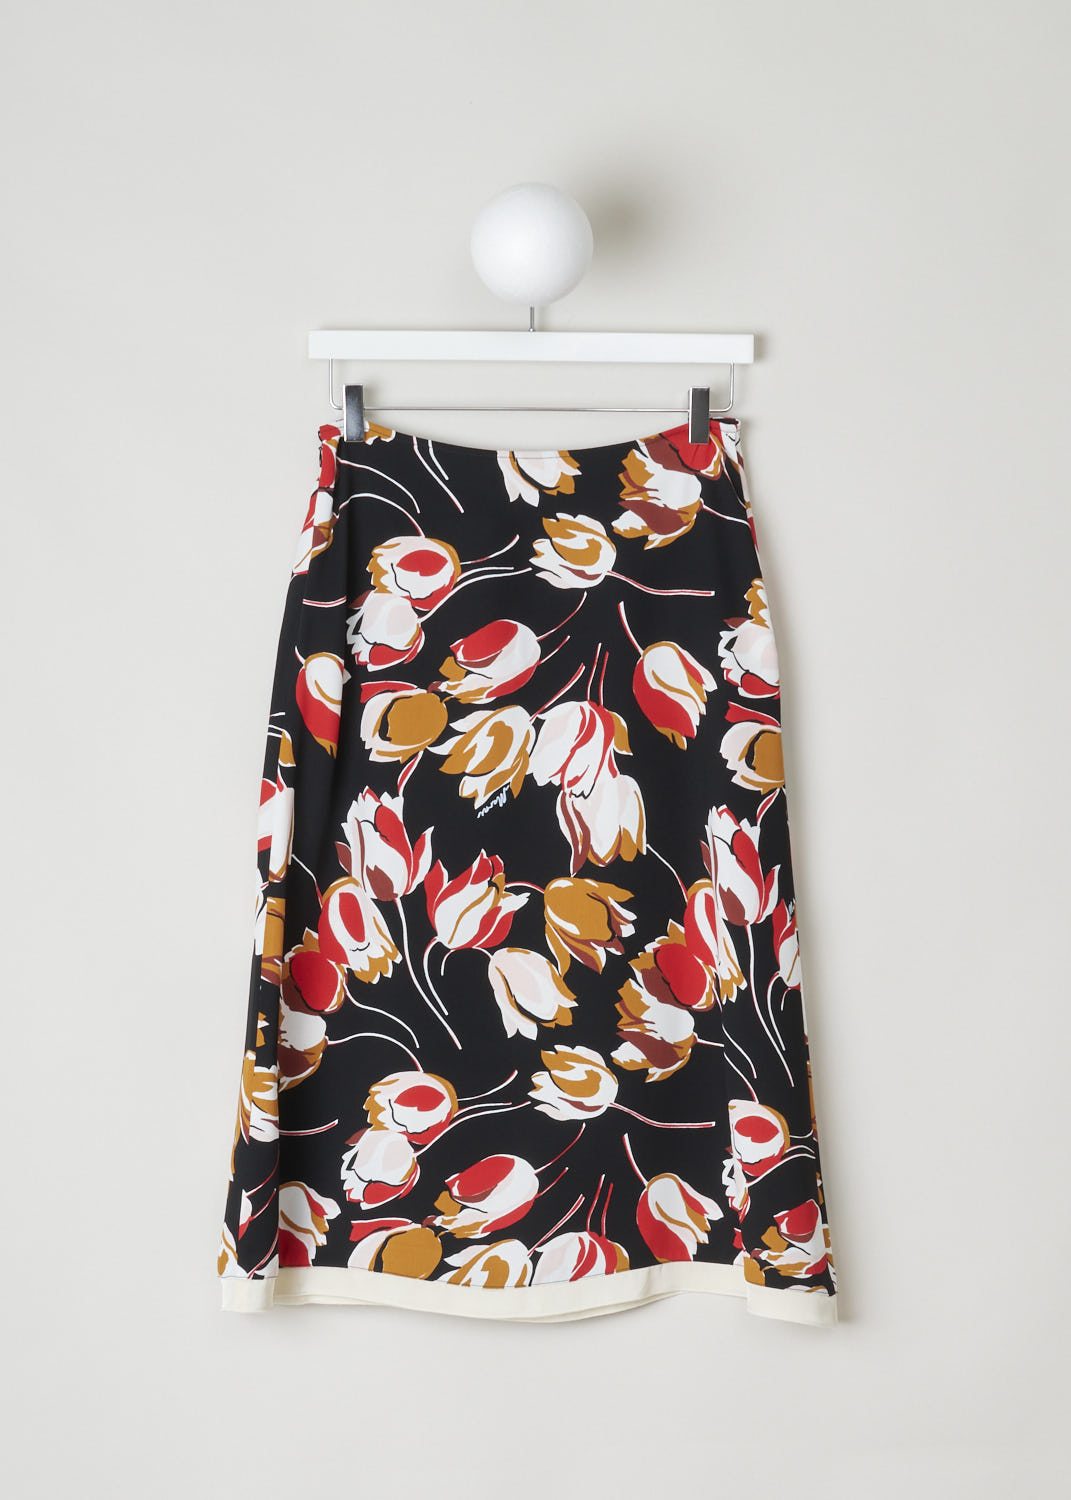 MARNI, BLACK A-LINE SKIRT WITH RED FLORAL PRINT, GOMA0042Q0_UTV844_WIIN99, Black, Print, Back, This black A-line skirt has a floral print in shades of reds and browns. A concealed side zip functions as the closing option. The skirt has a white satin hemline.  
